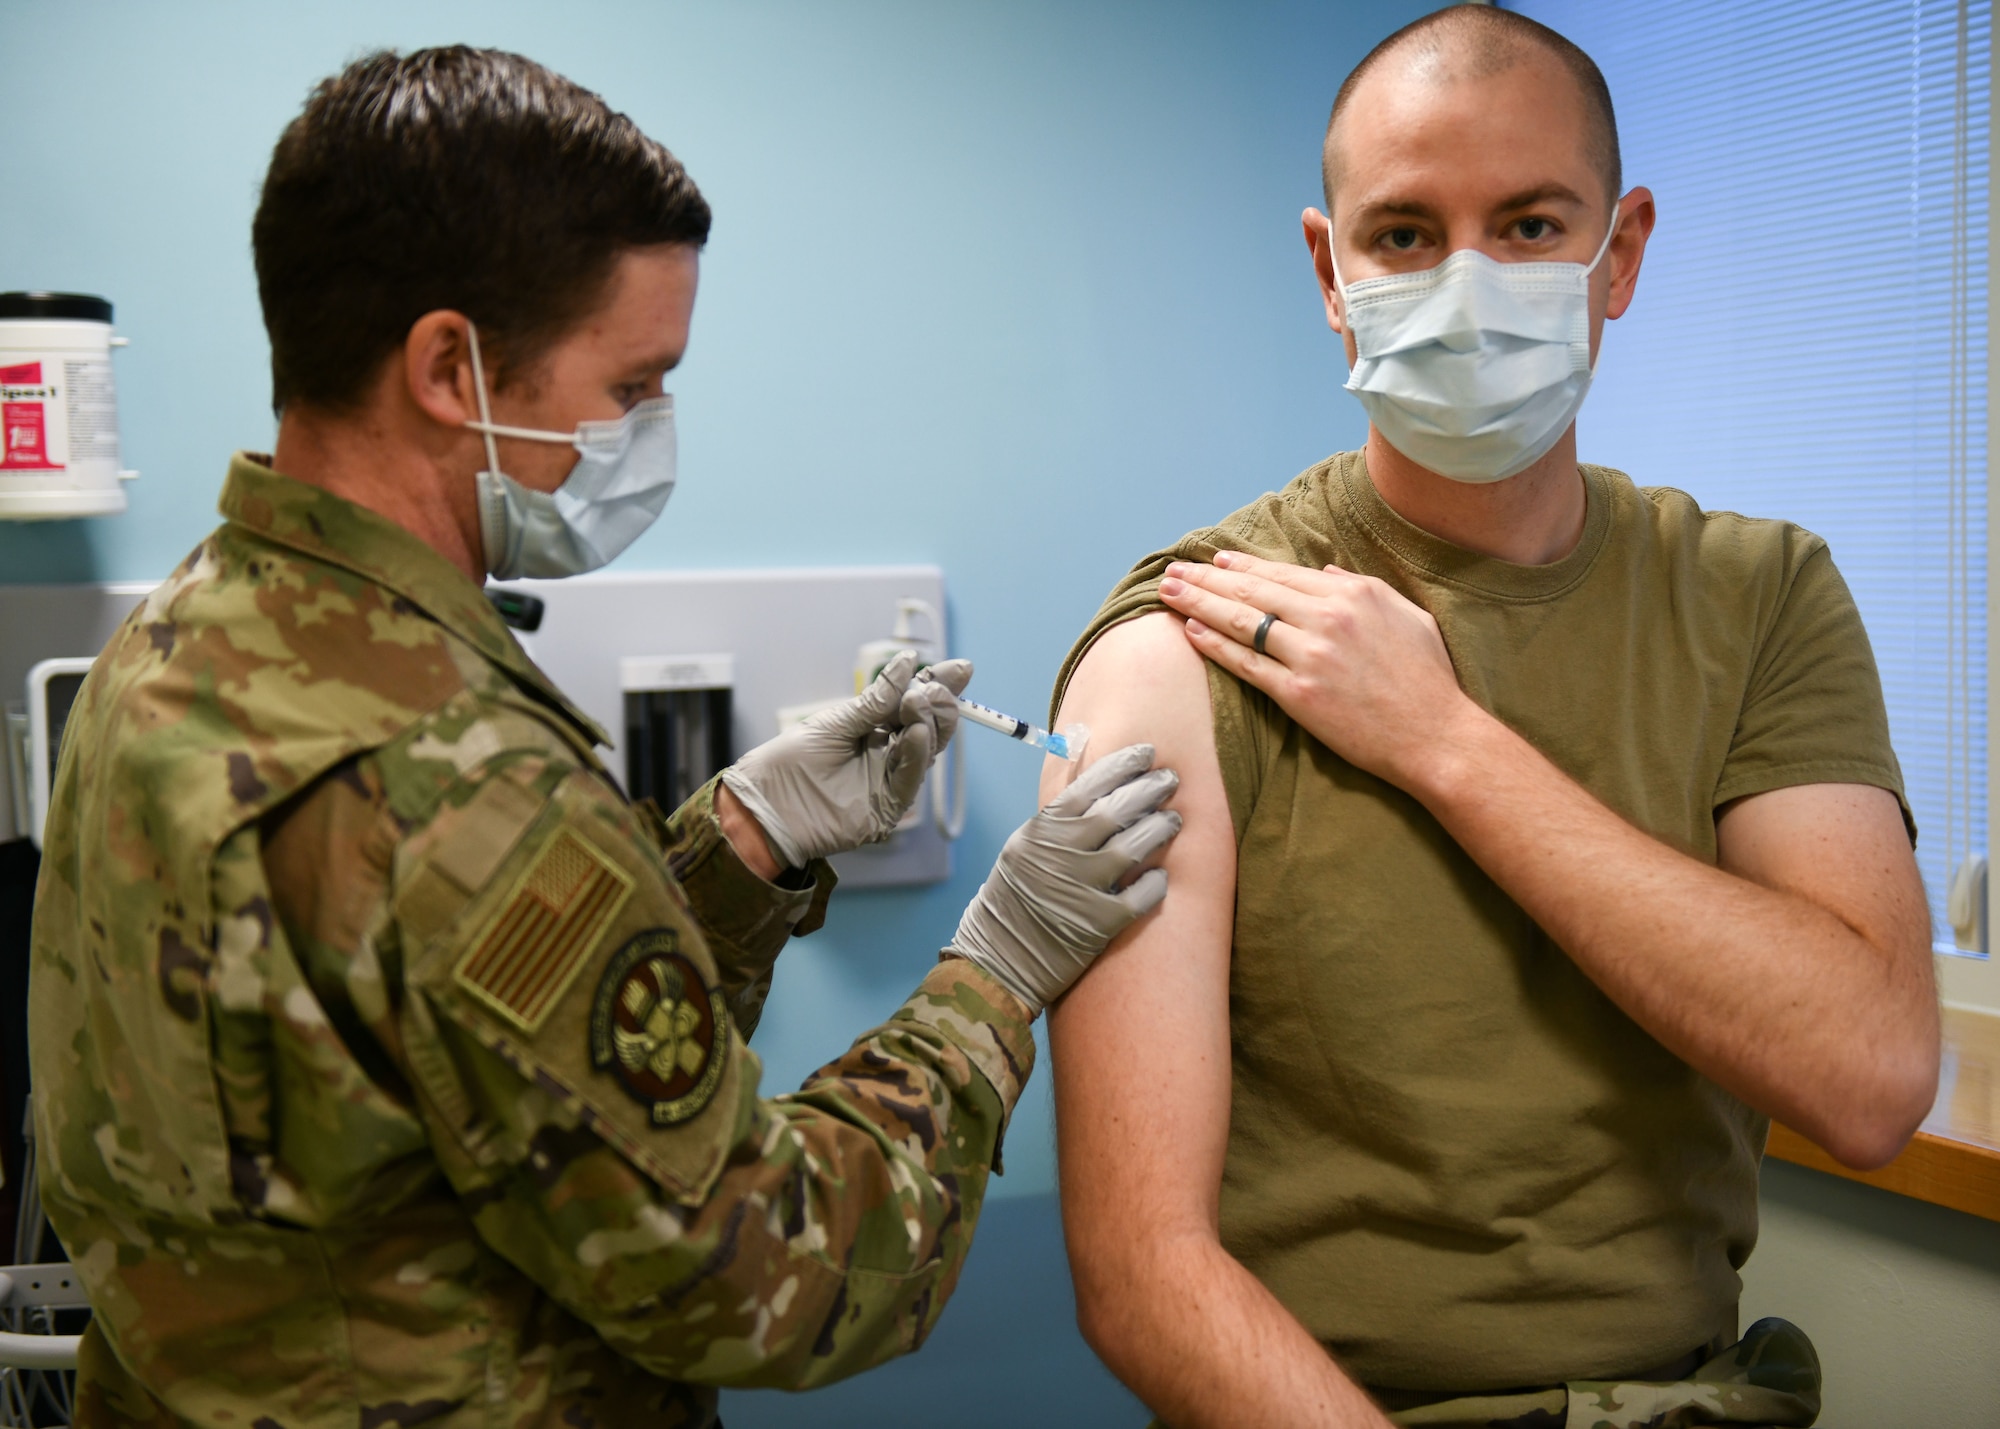 Technical Sgt. Justin Pribble, 48th Medical Group pediatrics/immunology flight chief, administers the first COVID-19 vaccine to Capt. Branden Hunsaker, 48th Medical Group emergency physician, at Royal Air Force Lakenheath, England, Dec. 29, 2020. The initial shipment of vaccines will be limited to healthcare workers and first responders. As the distribution is carried out, information on subsequent phases will be provided through command channels and installation web and social media channels. (U.S. Air Force photo by Senior Airman Madeline Herzog)